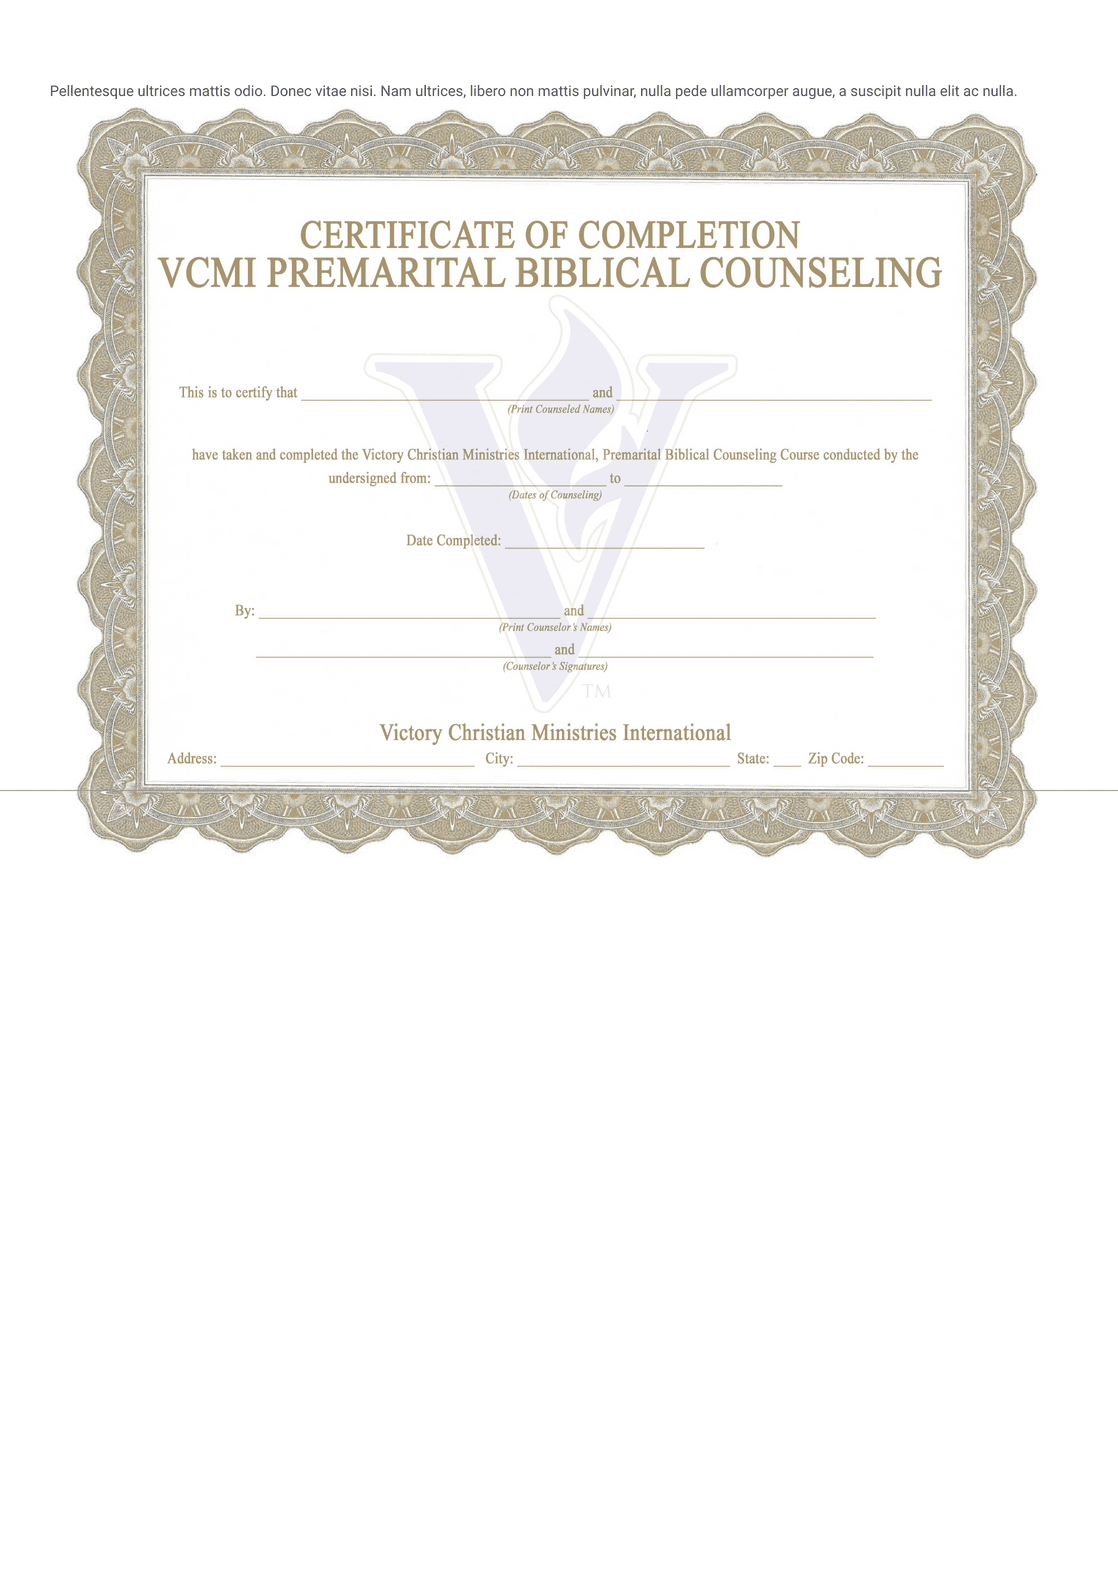 PDF Templates: Premarital Counseling Completion Certificate